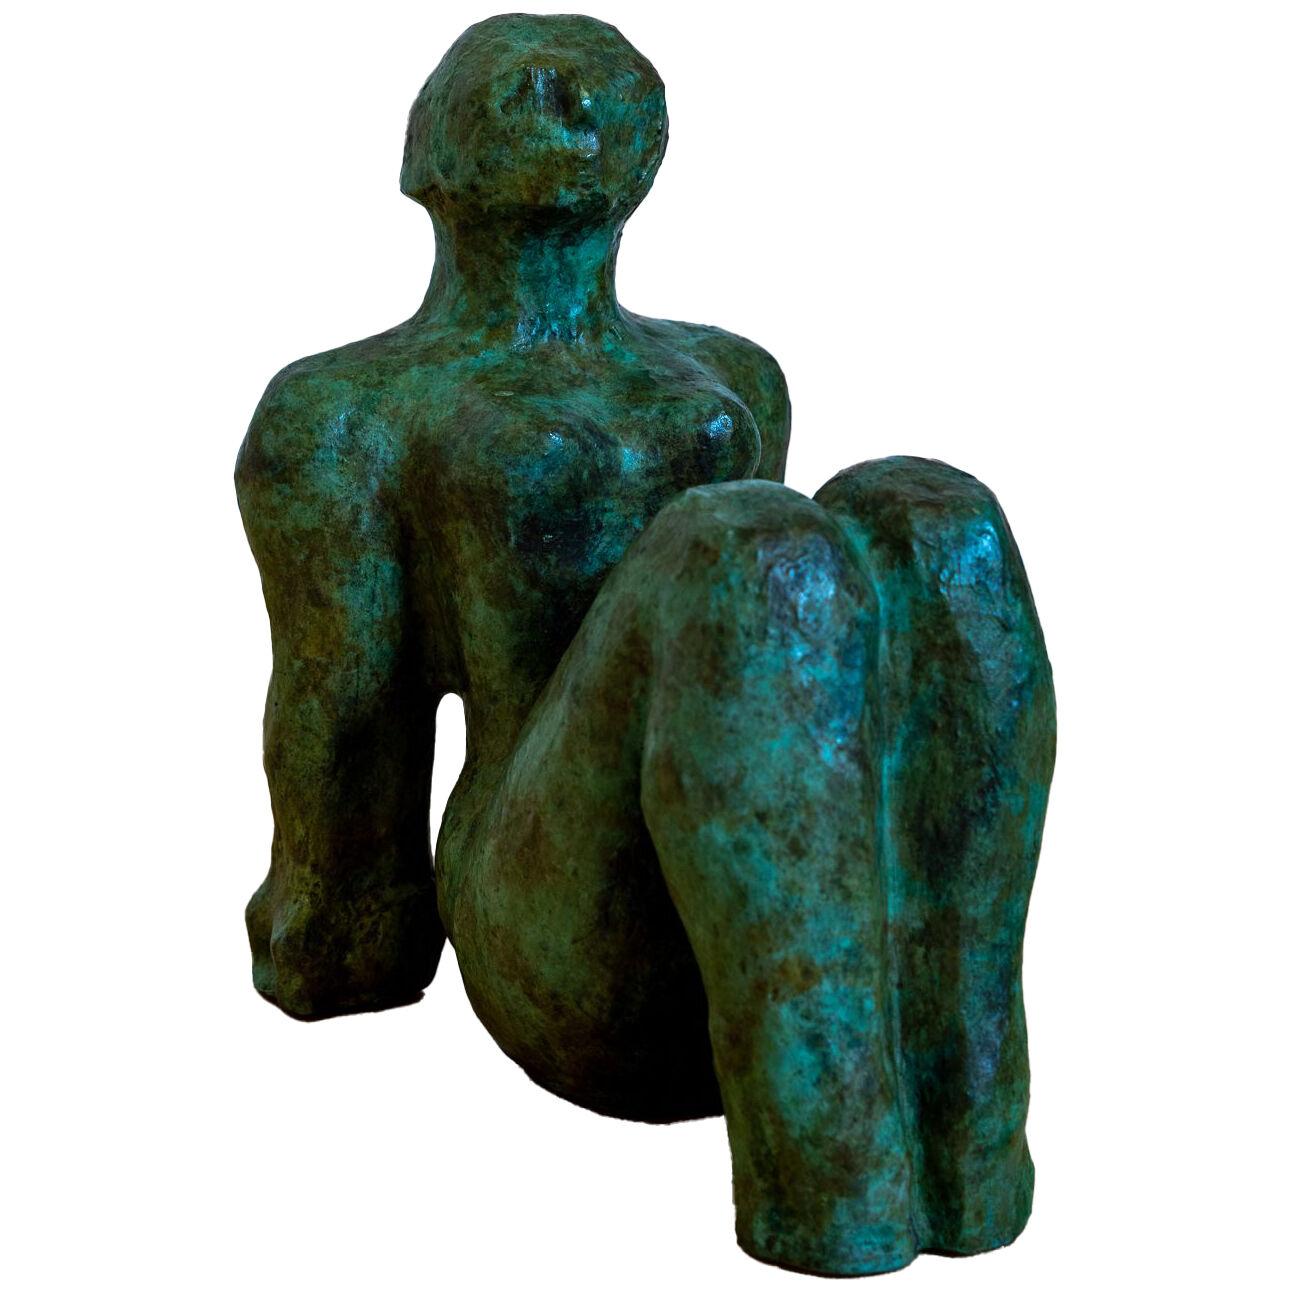 "Knees Up", A Patinated Bronze Nude By Barbara Beretich (1936-2018)